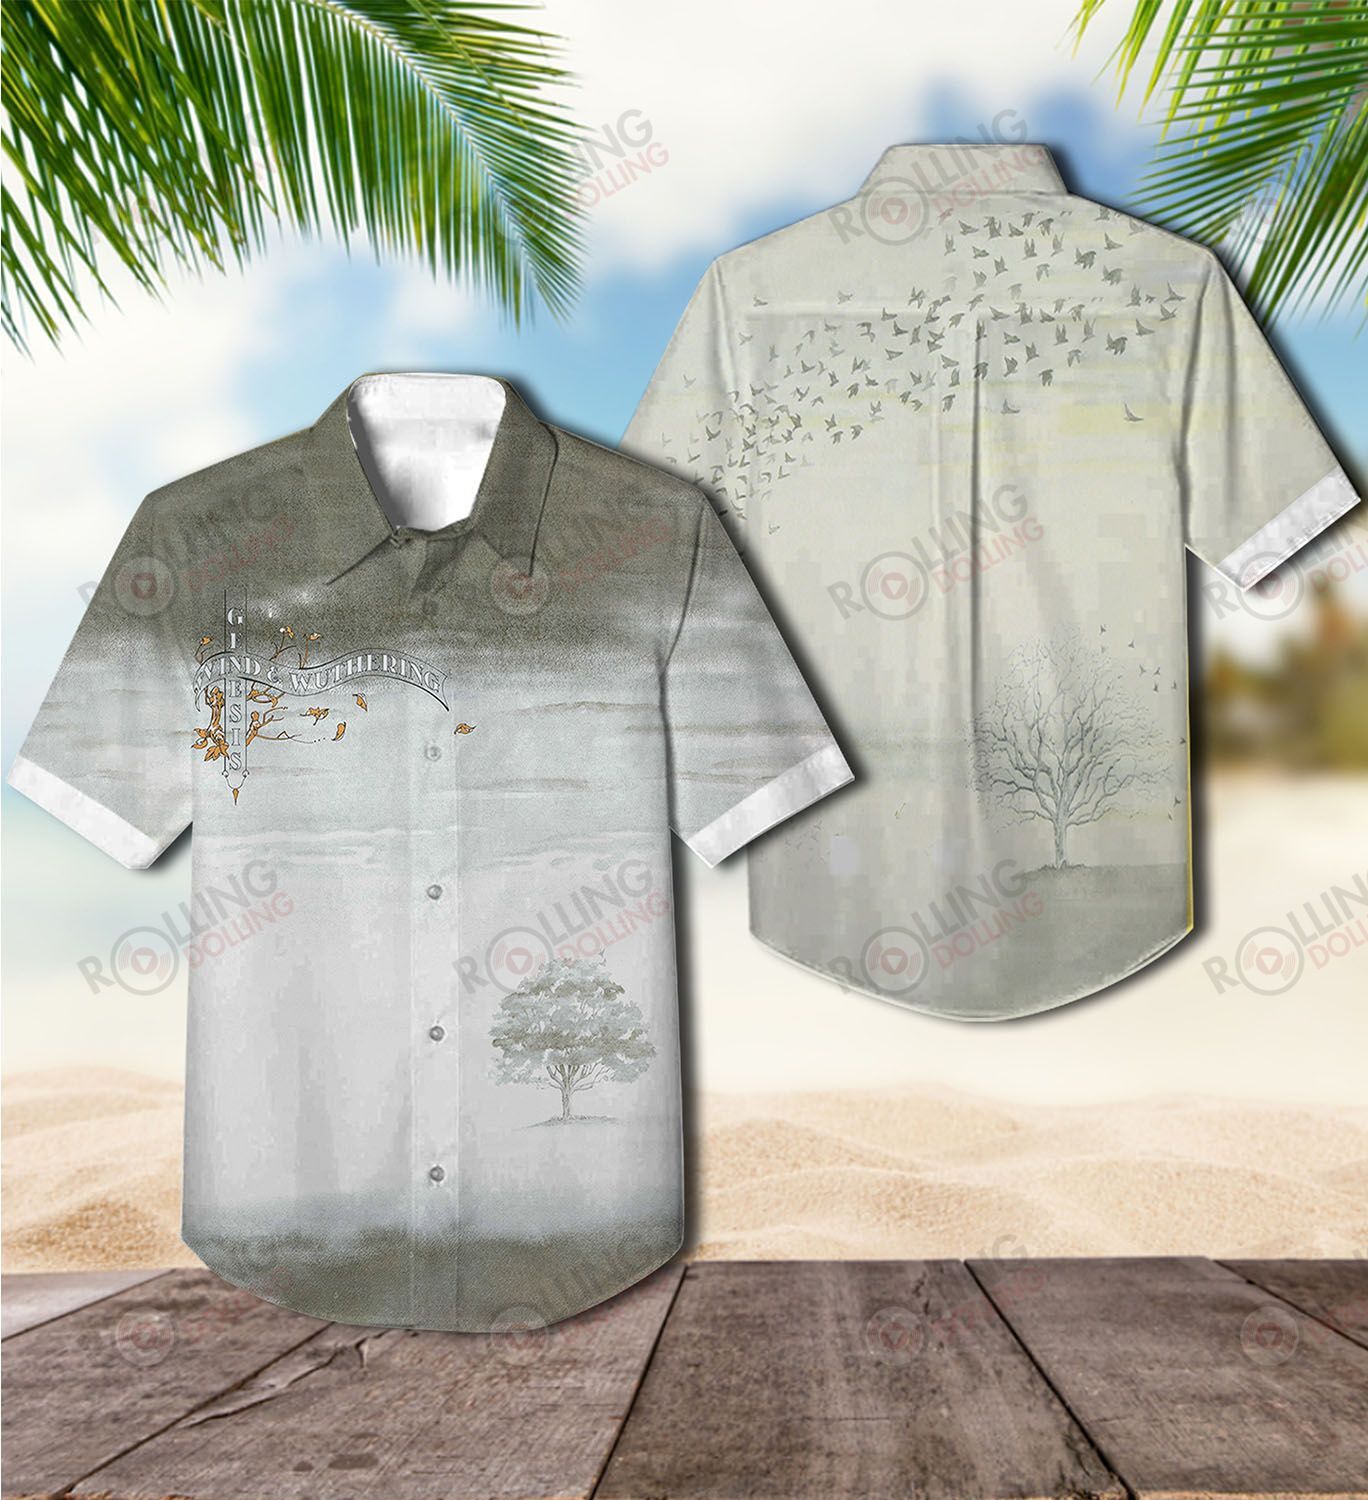 This would make a great gift for any fan who loves Hawaiian Shirt as well as Rock band 62